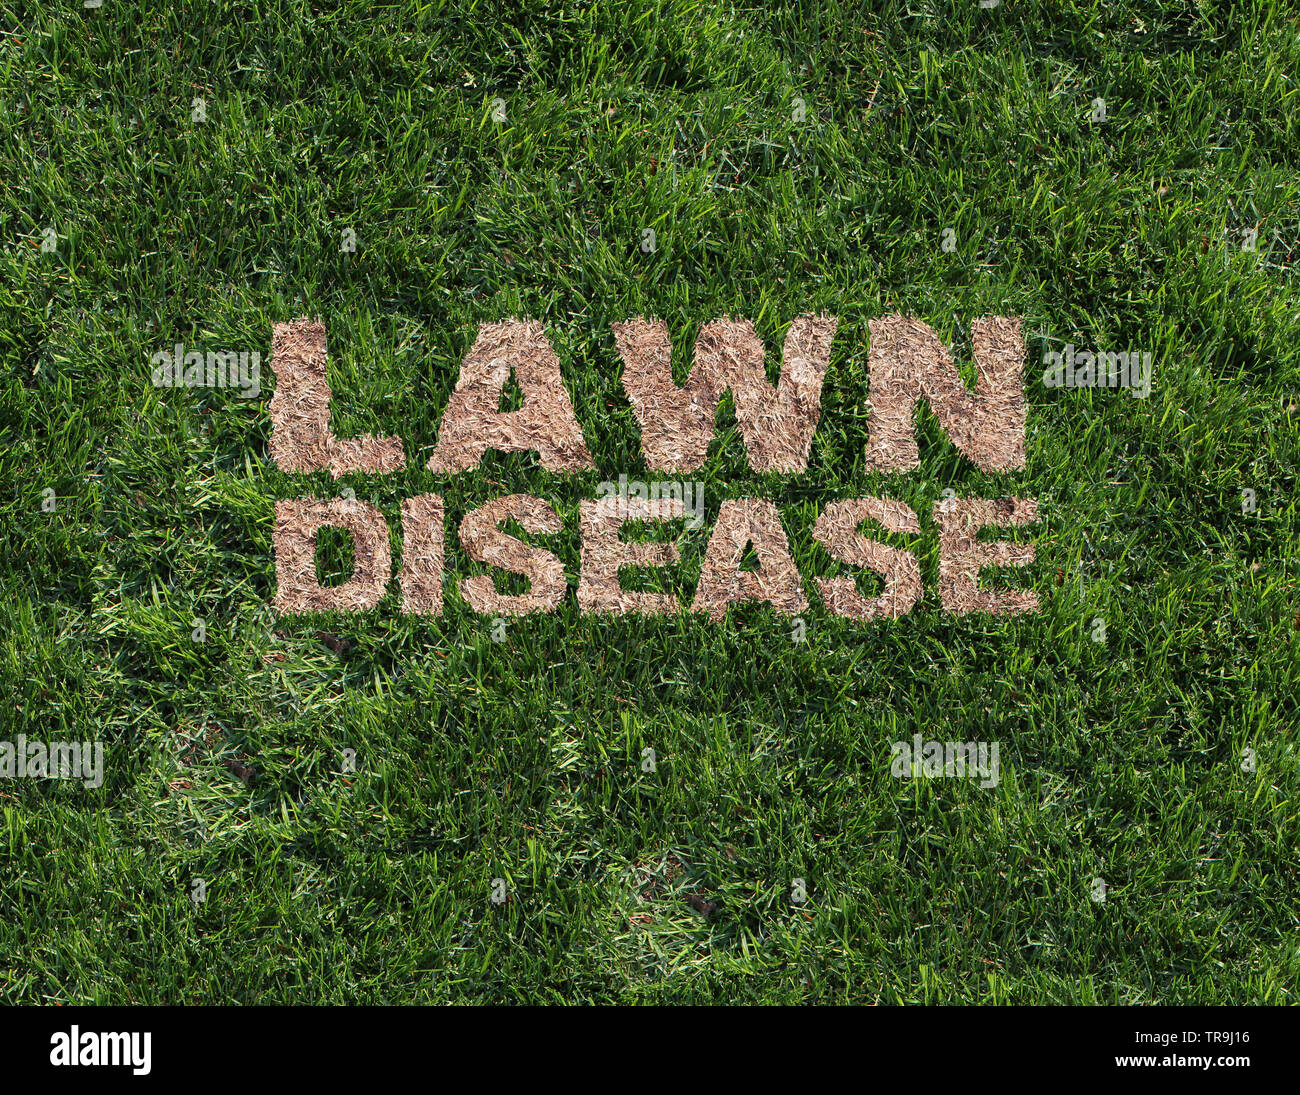 Lawn disease as grub damage as chinch larva damaging grass roots causing a brown patch and drought area in the turf as a composite image. Stock Photo